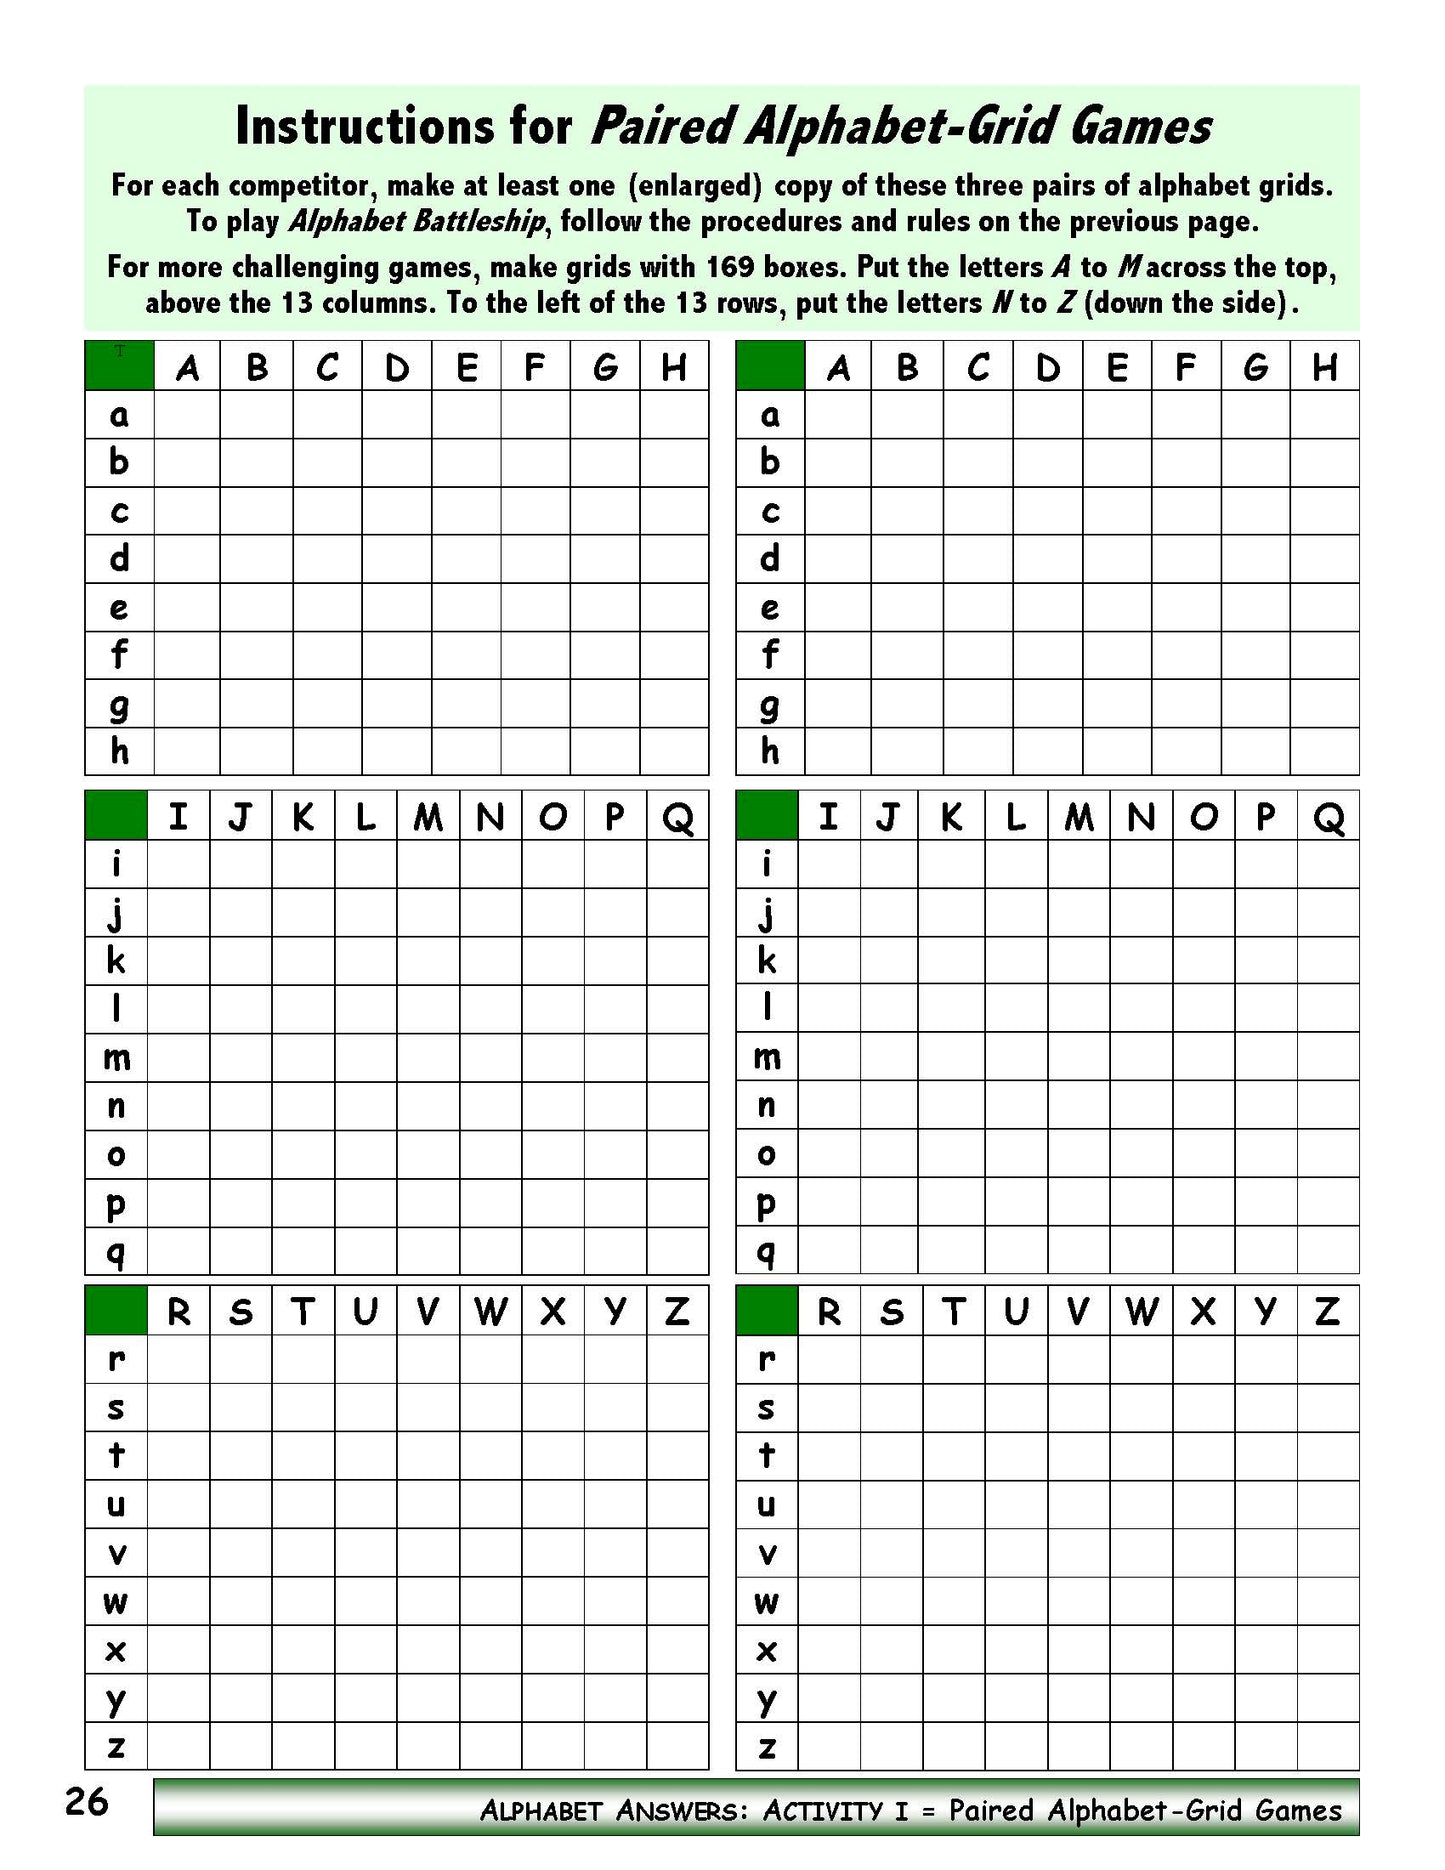 A-05.01: Make and Play Paired Alphabet-Letter Grid Games